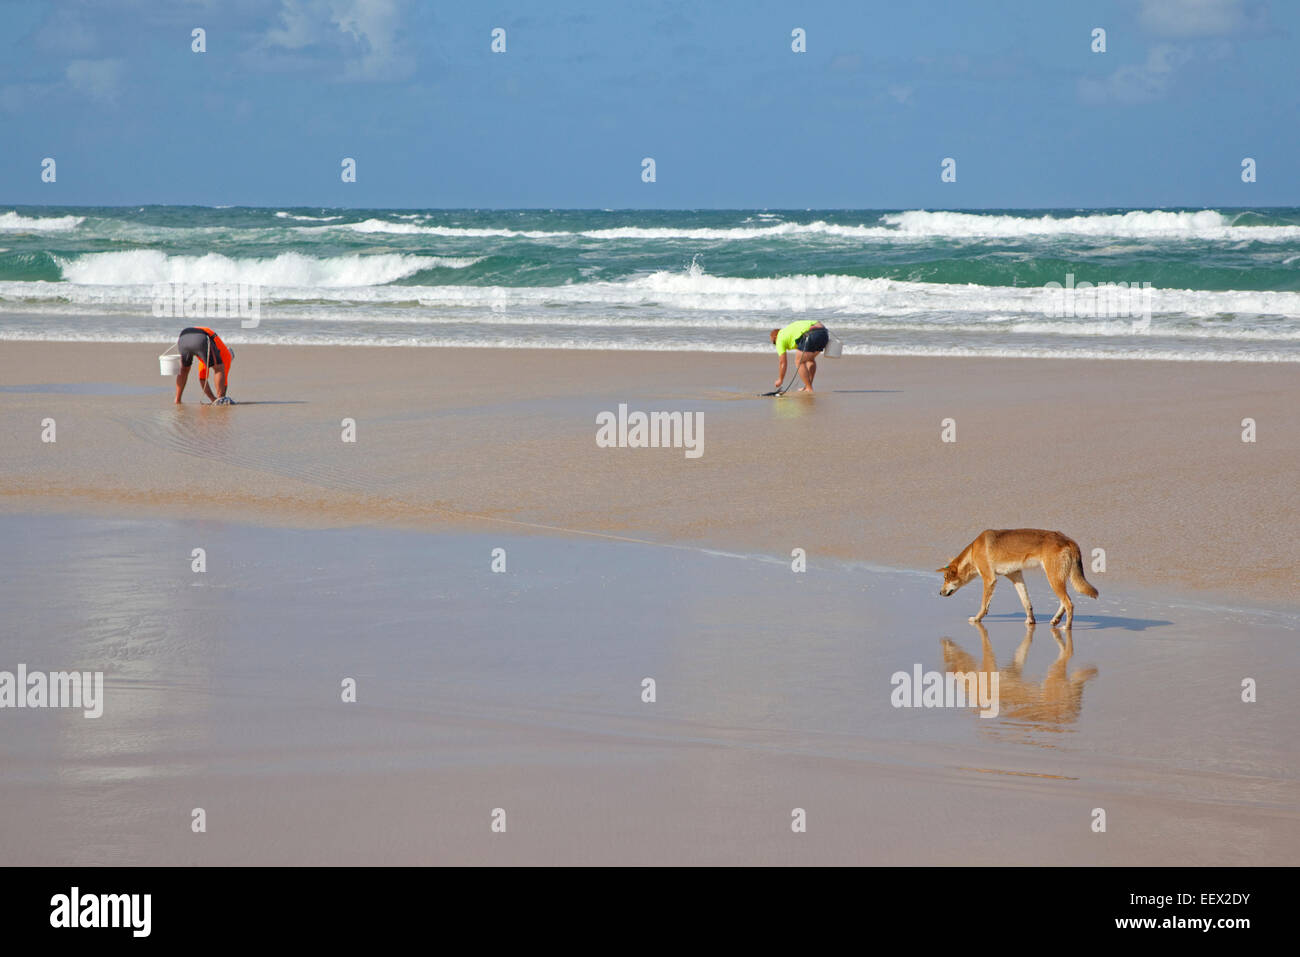 Dingo looking at two fishermen searching for bristle worms / polychaetes on the beach on Fraser Island, Queensland, Australia Stock Photo